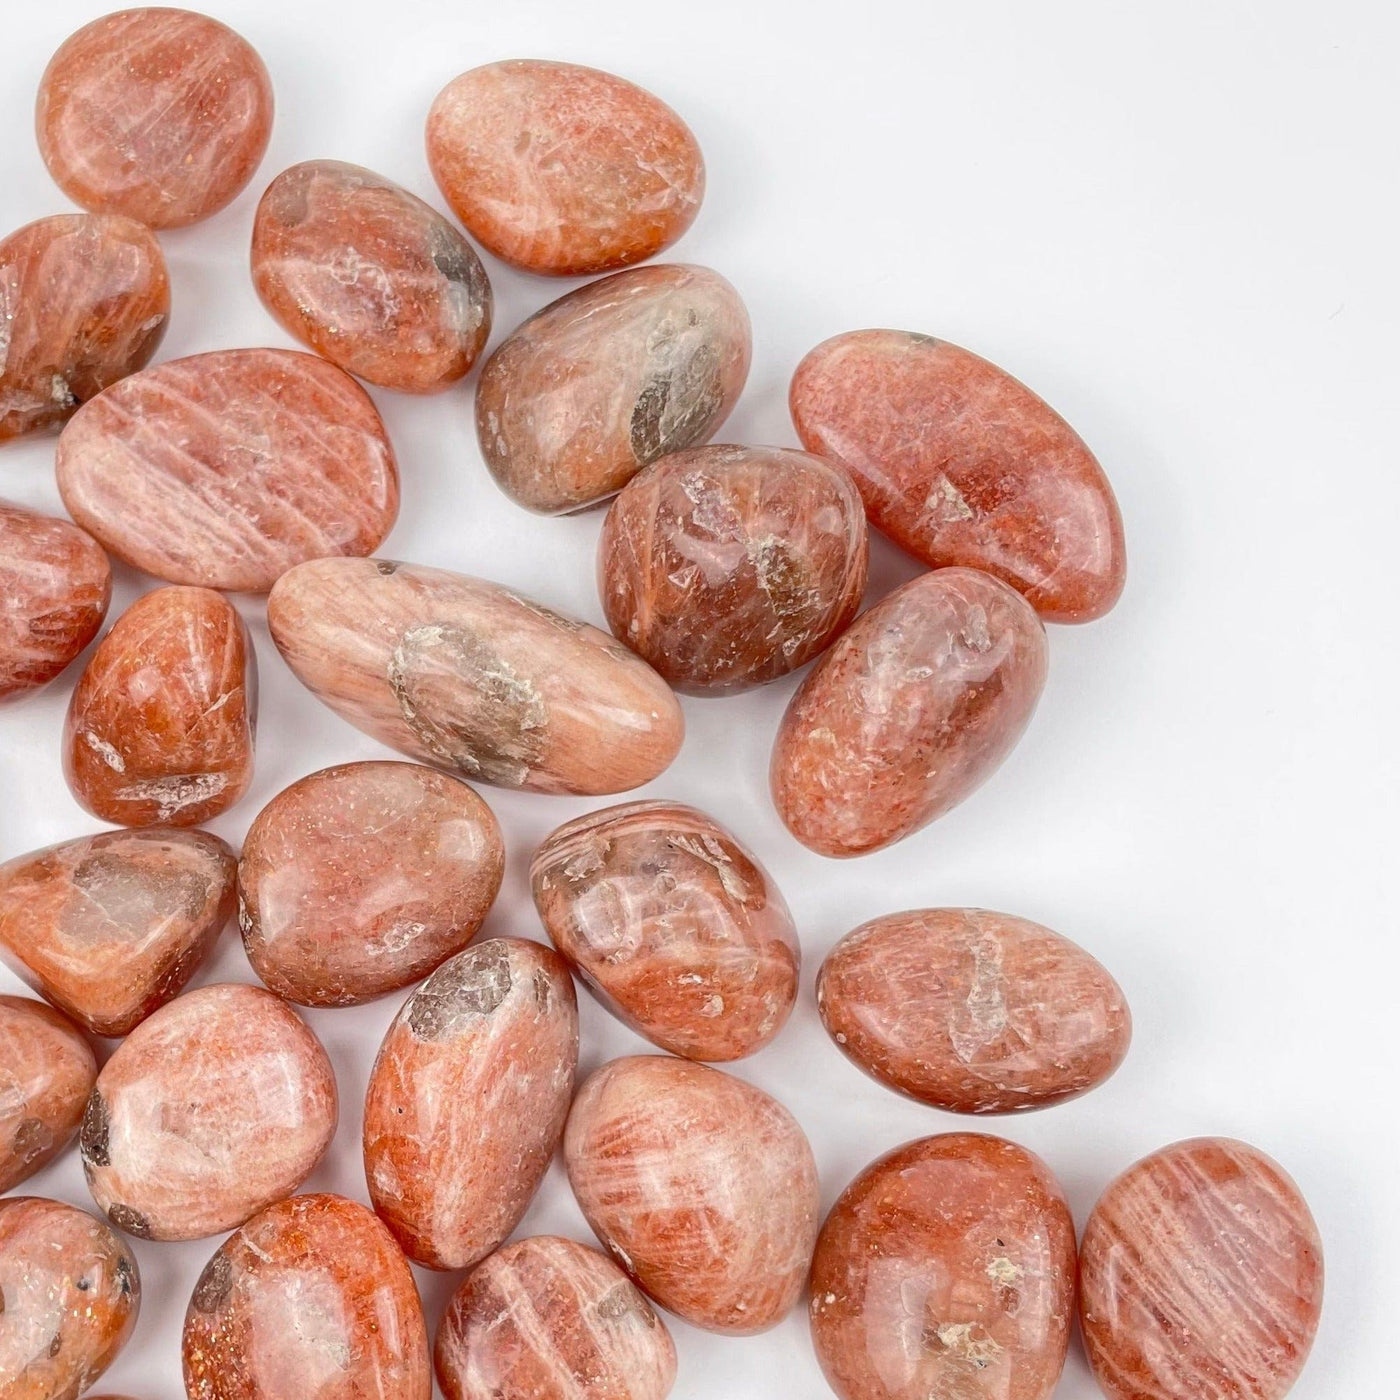 Golden Sunstone Tumbled Stones displayed for size reference 